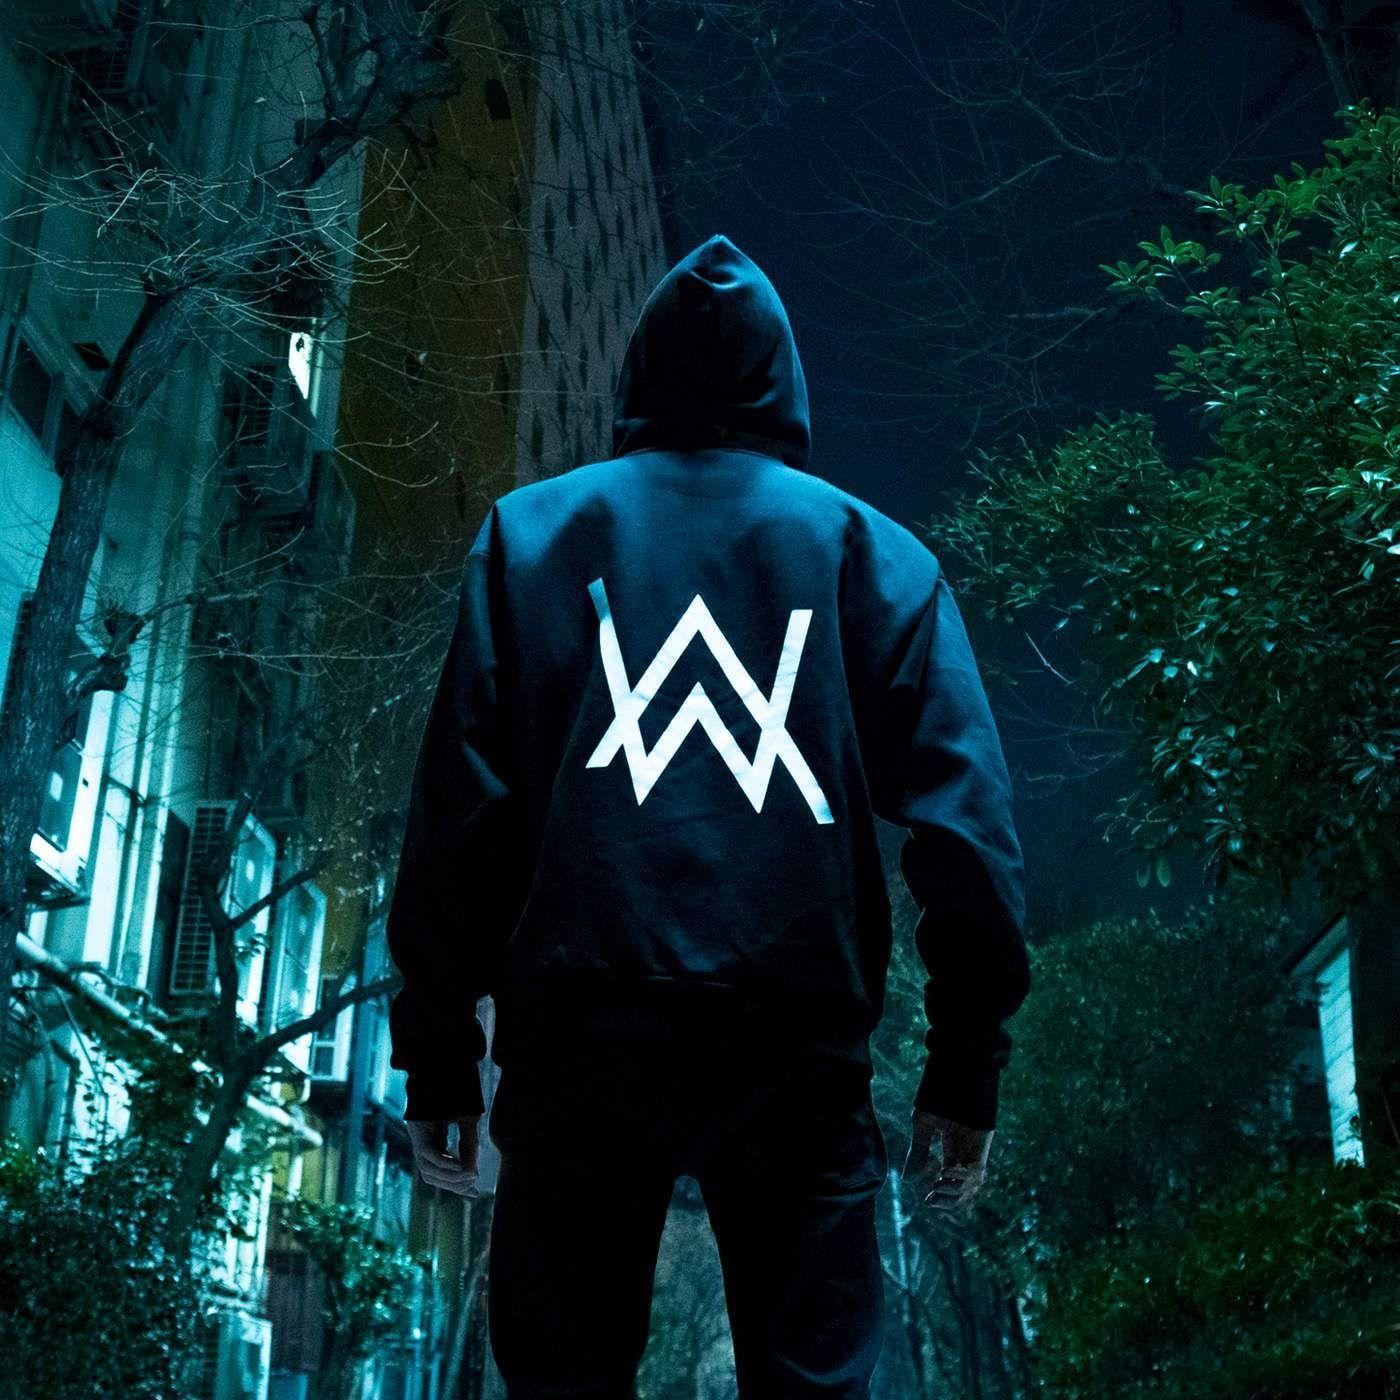 Alan walker wallpaper 2019 for Android